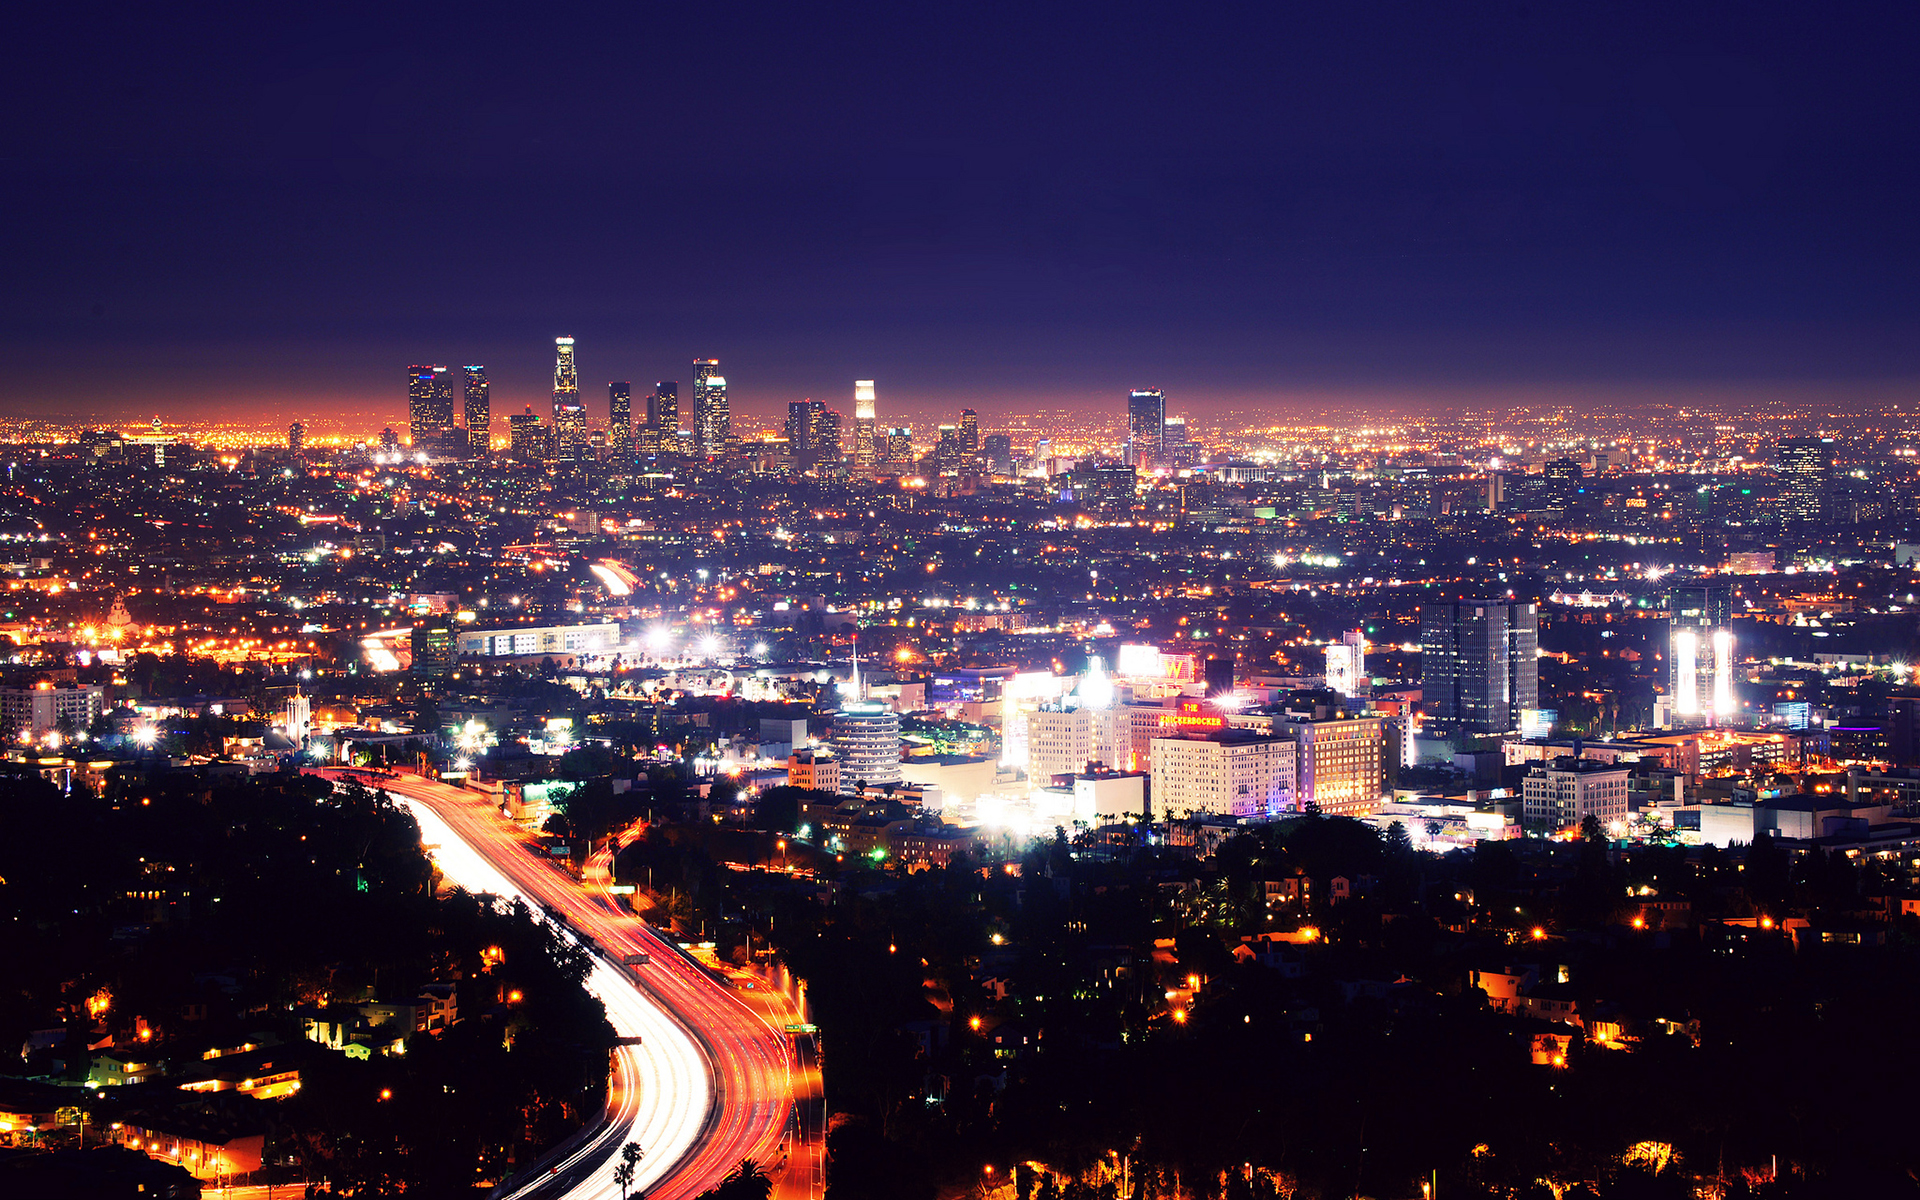 los, Angeles, Cities, Architecture, Buildings, Skyscrapers, Night, Lights, Roads, Hdr Wallpaper